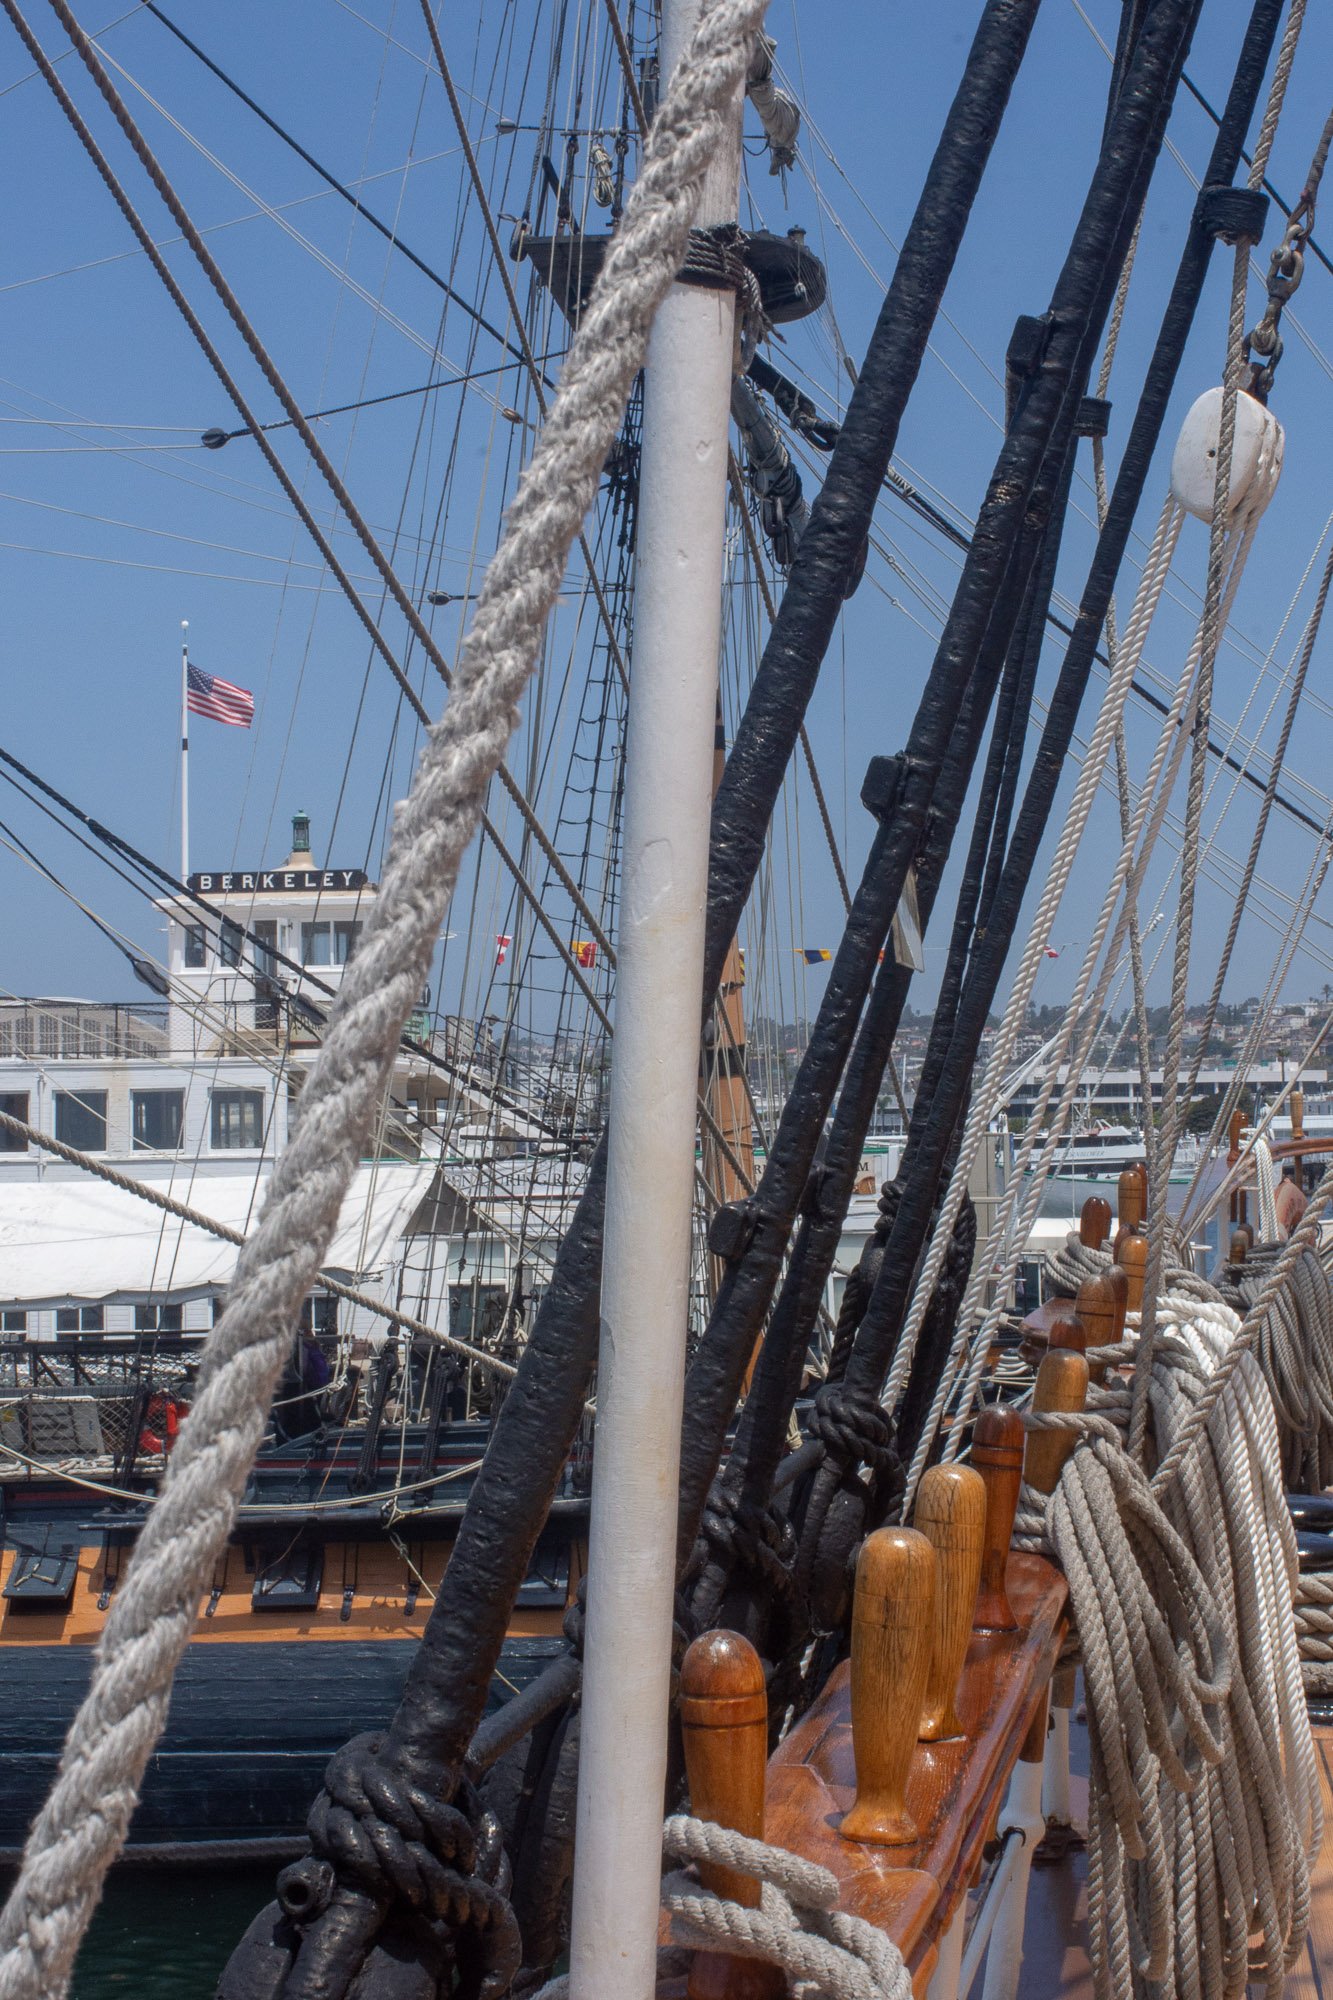 Aboard the Star of India. Could you keep all those ropes straight?